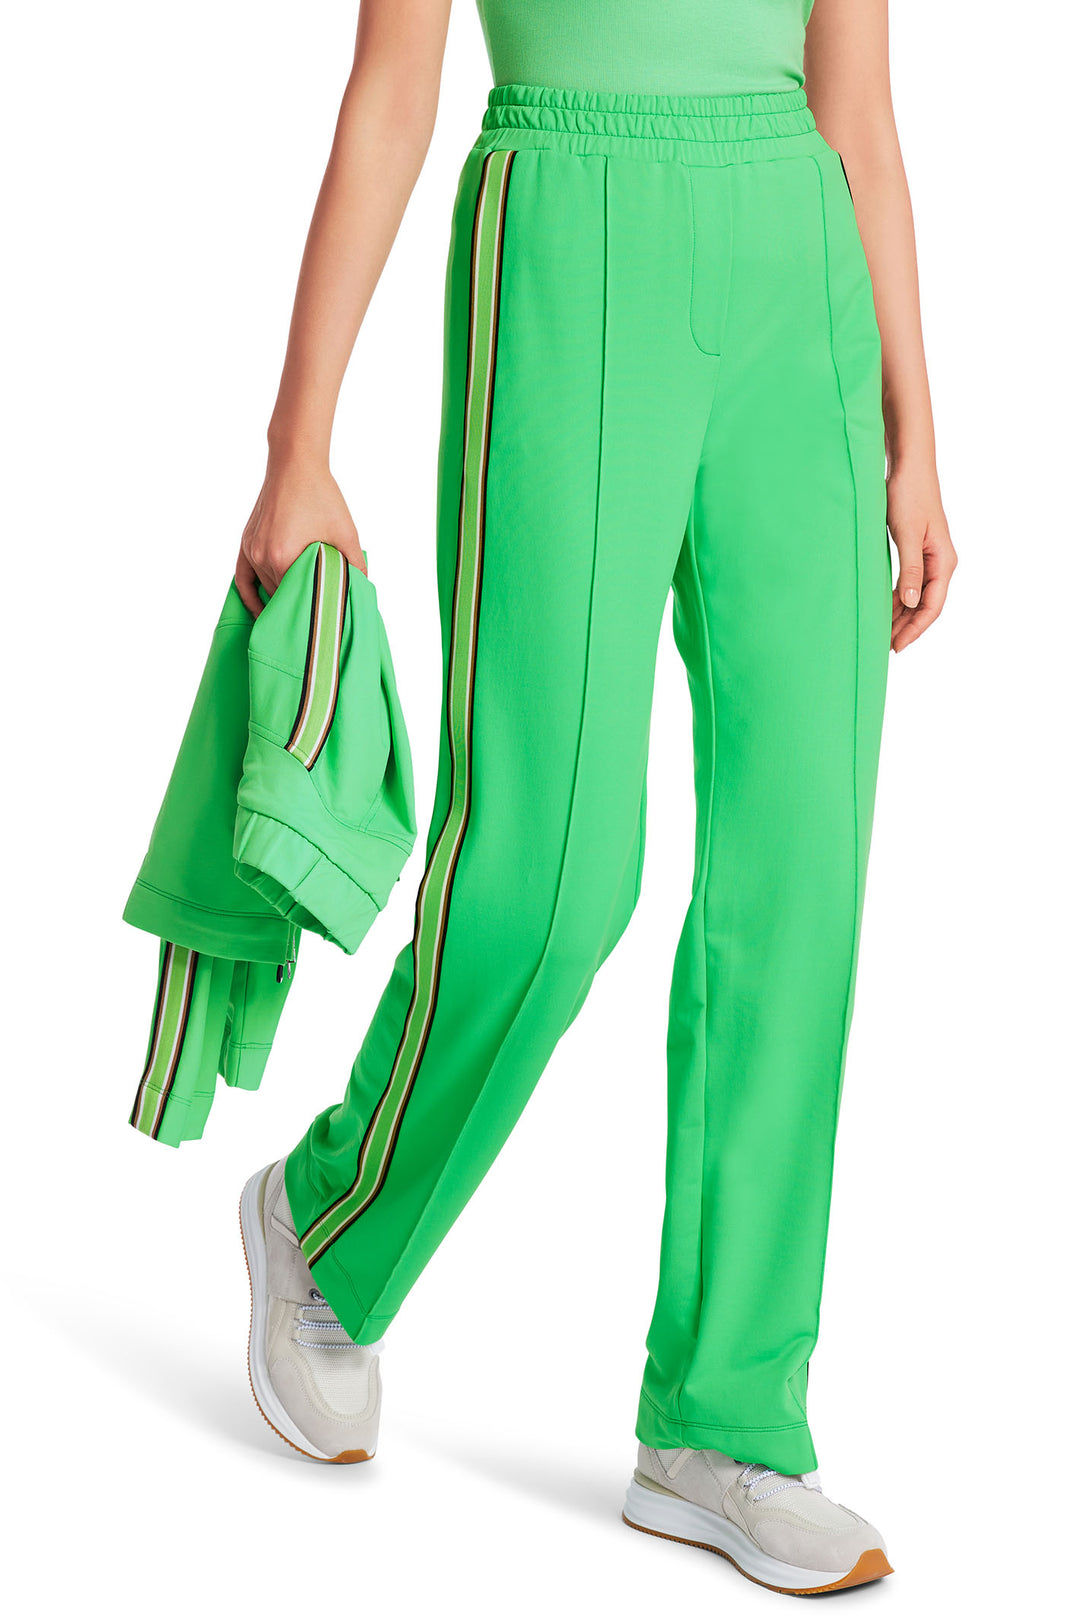 Marc Cain Sports WS 81.43 J51 543 New Neon Green Welby Trousers - Olivia Grace Fashion